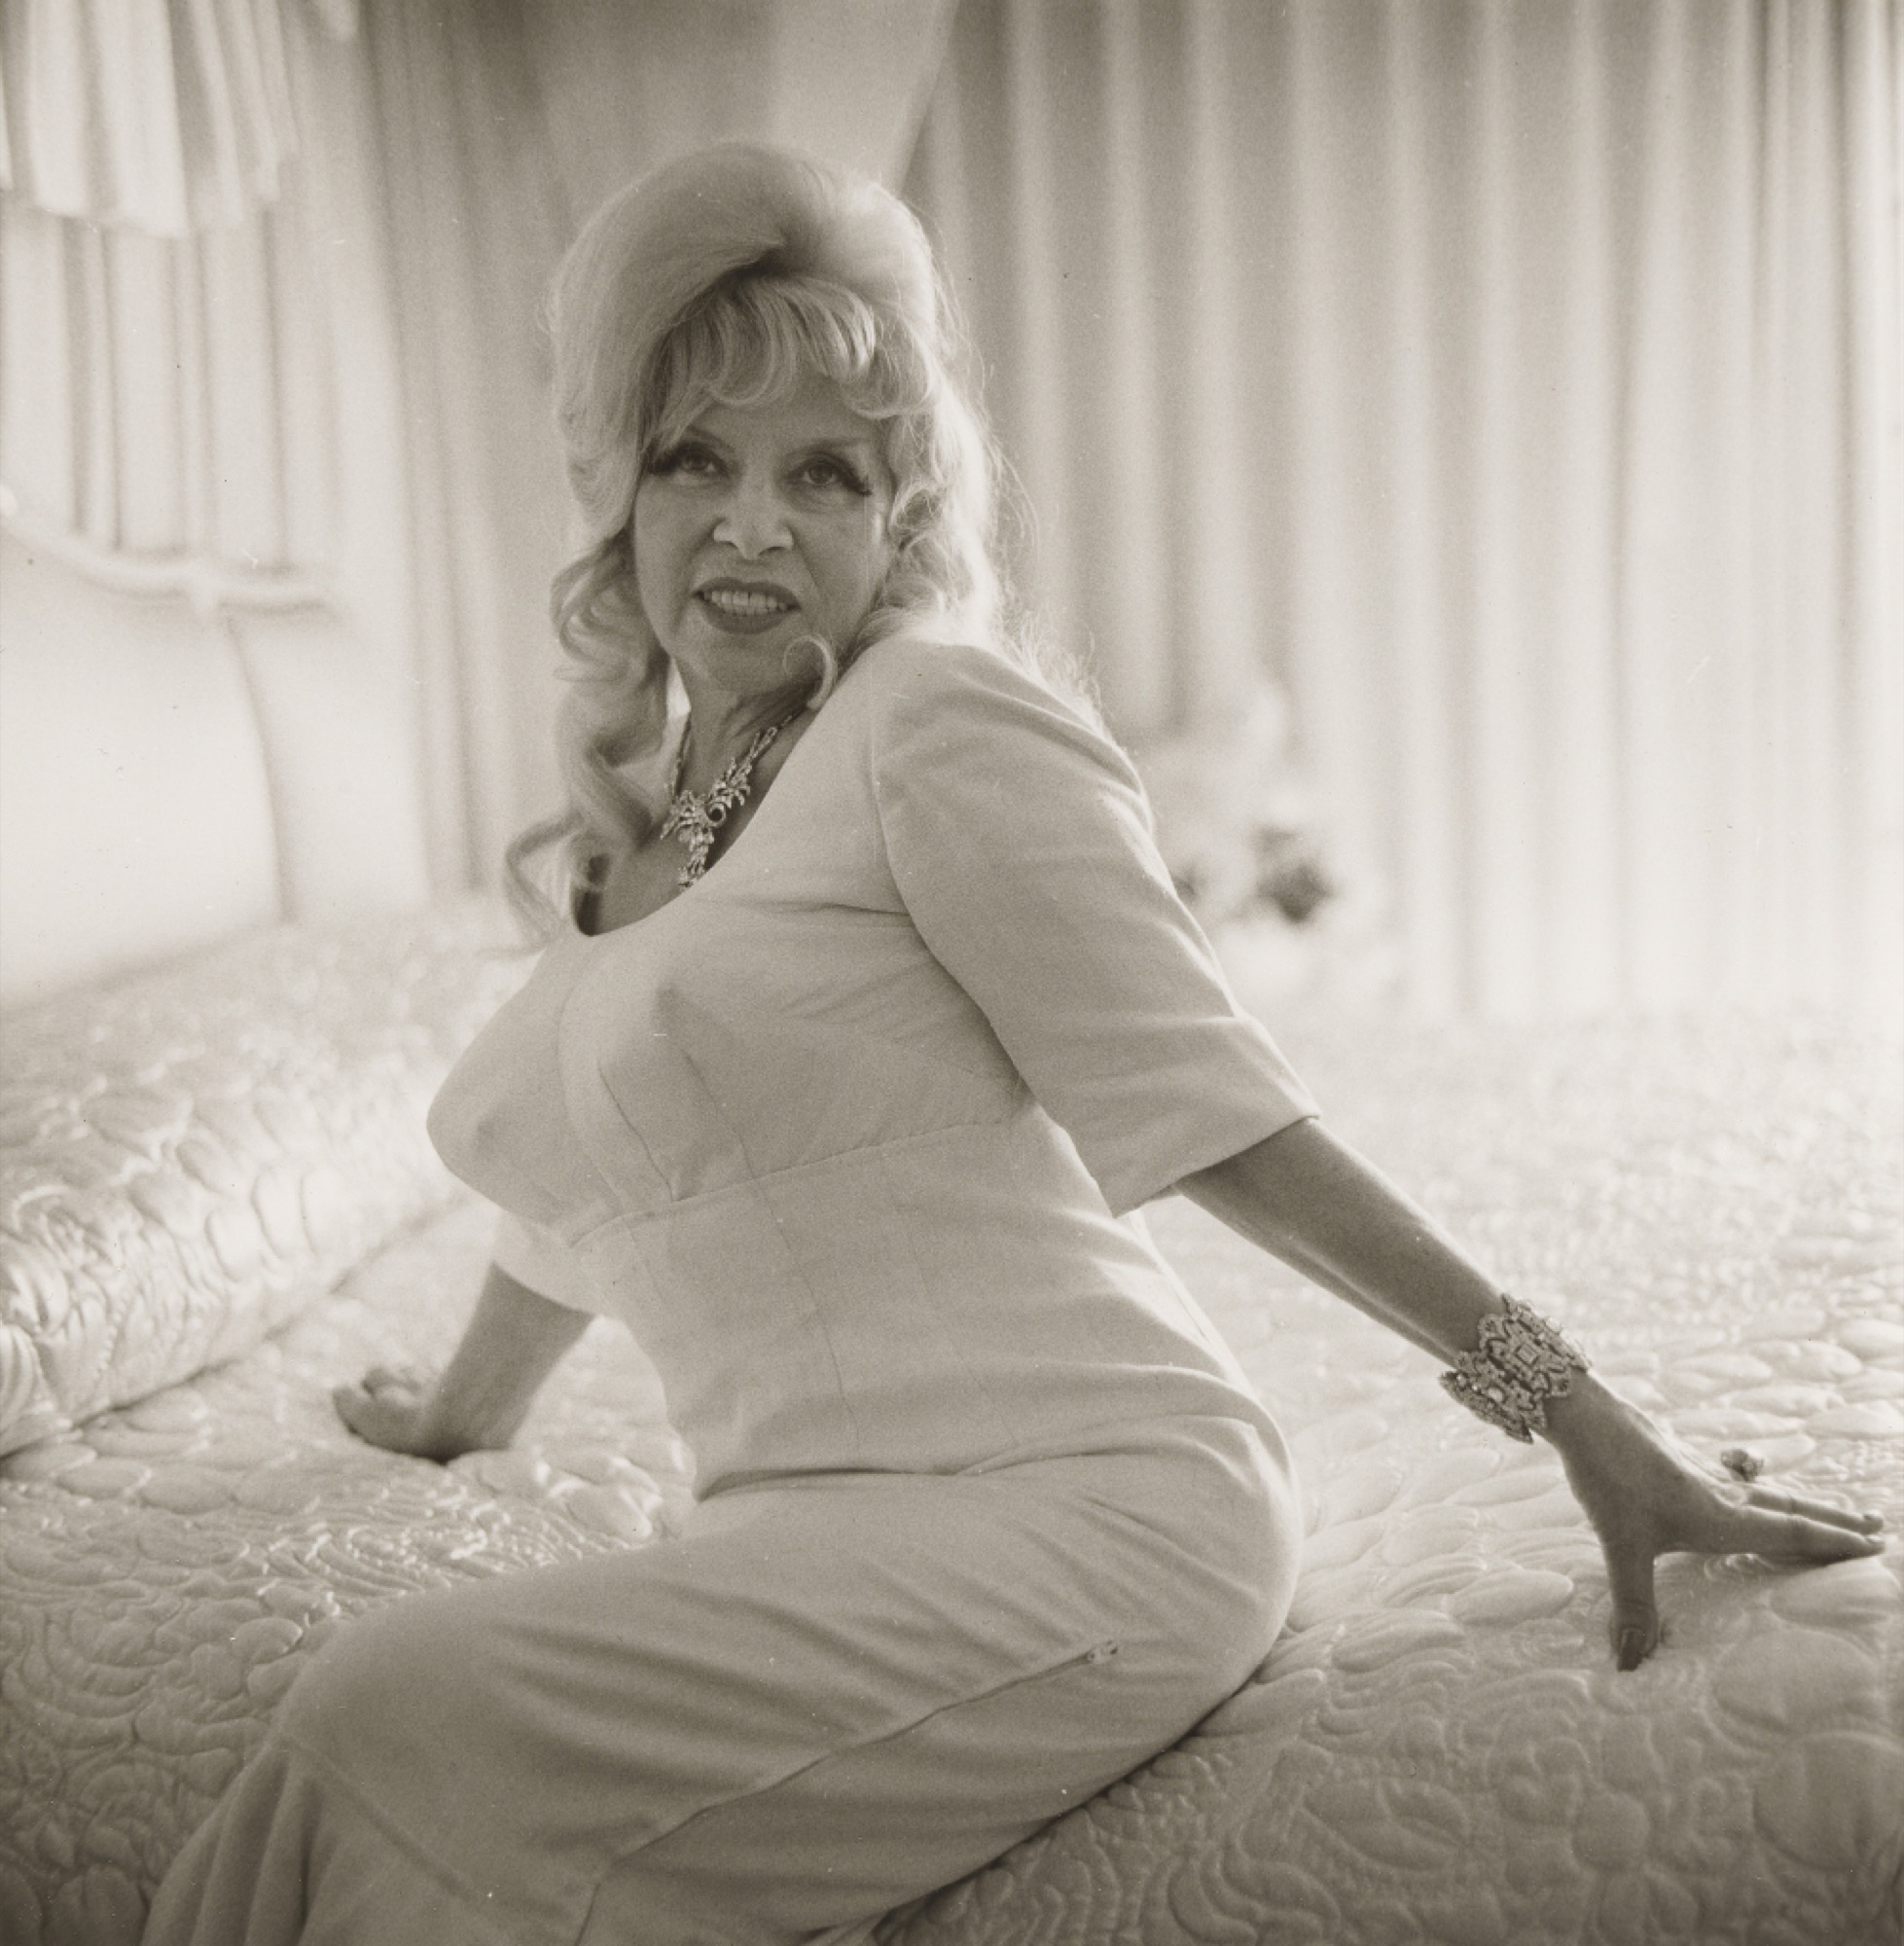 Diane Arbus, <em>Mae West on bed,</em> 1965, gelatin silver photograph, National Gallery of Australia, Canberra, Purchased 1981.